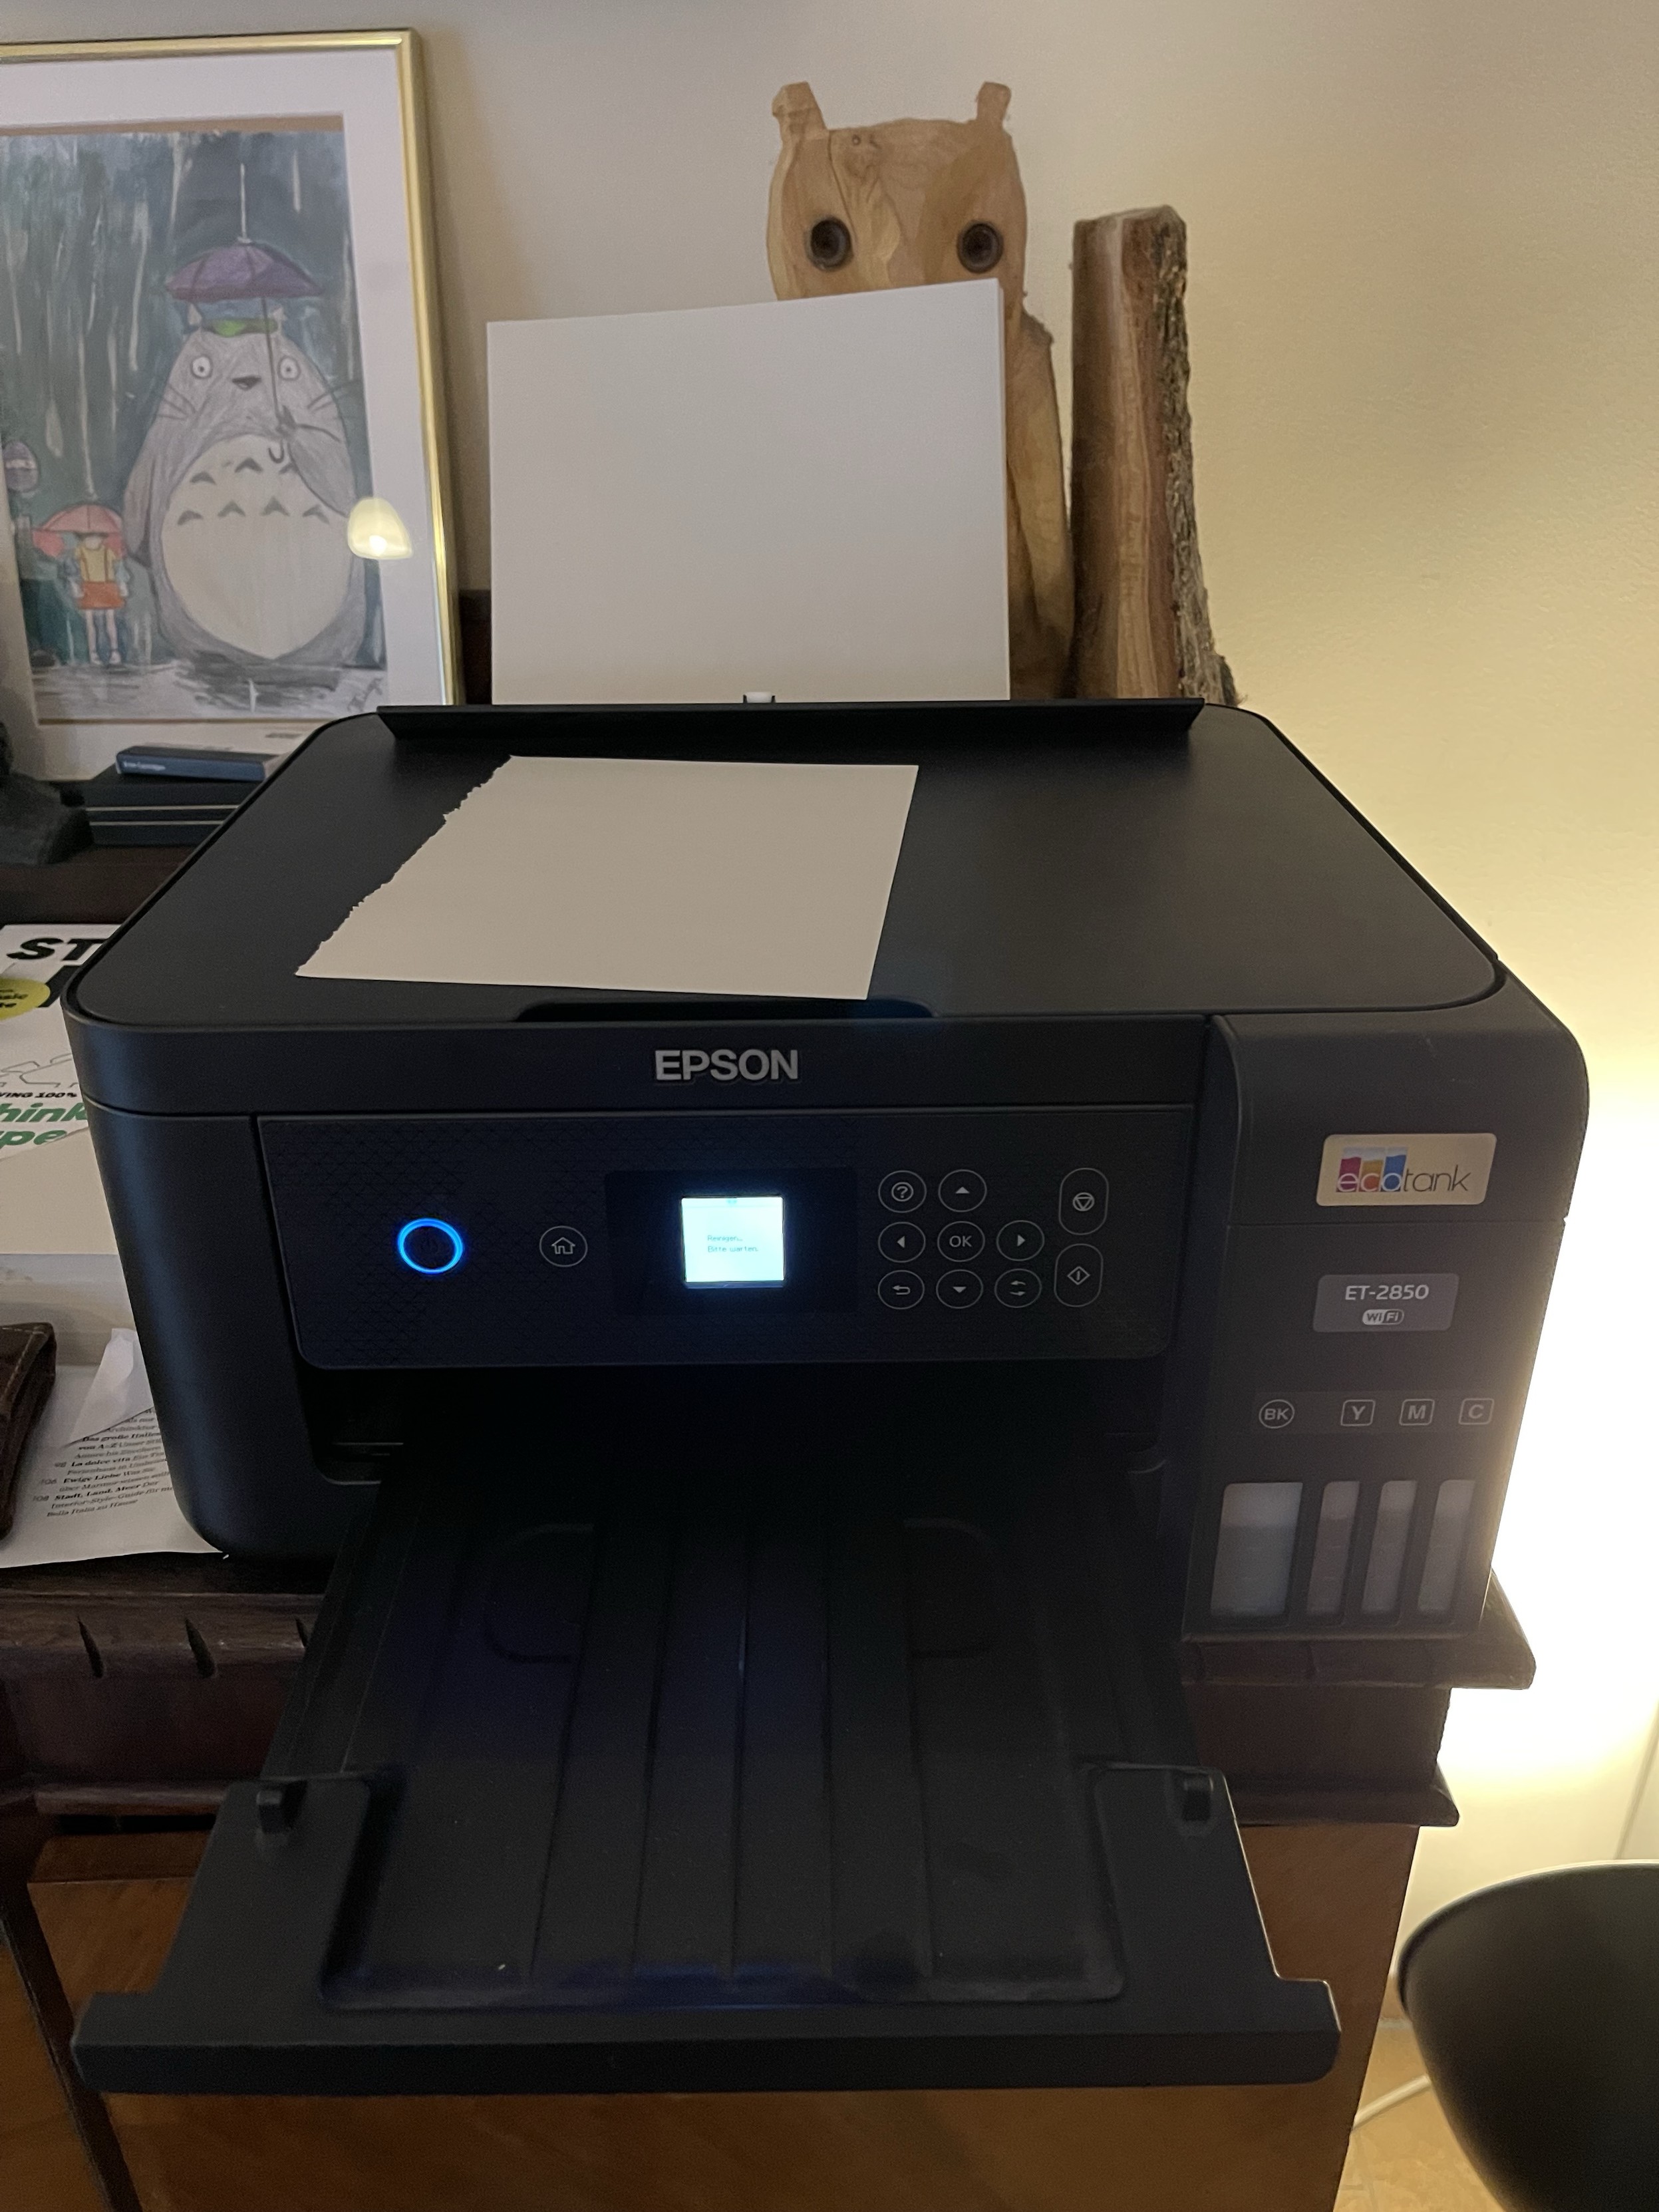 An Epson ink tank printer on a desk with a sheet of paper on the scanner bed, next to decorative items including a framed picture of a character and a wooden figure.